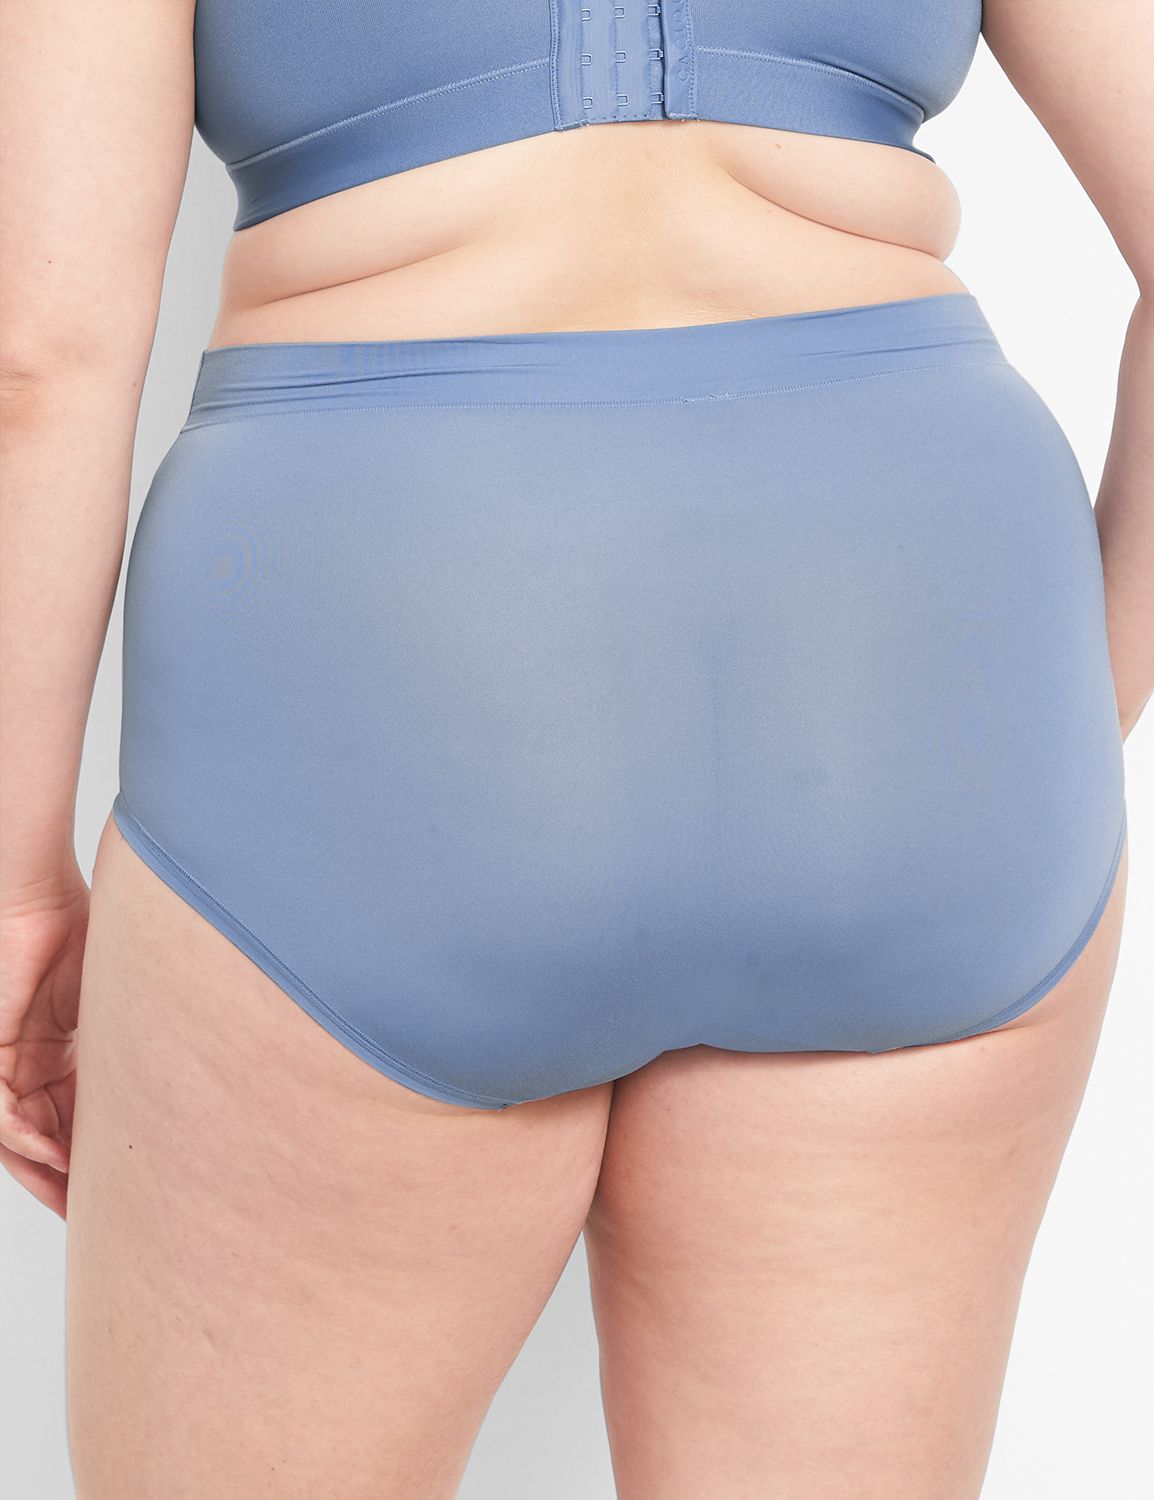 Woman Within: 😁 $19.99 5-Pack Panties! Let's Get Comfy For